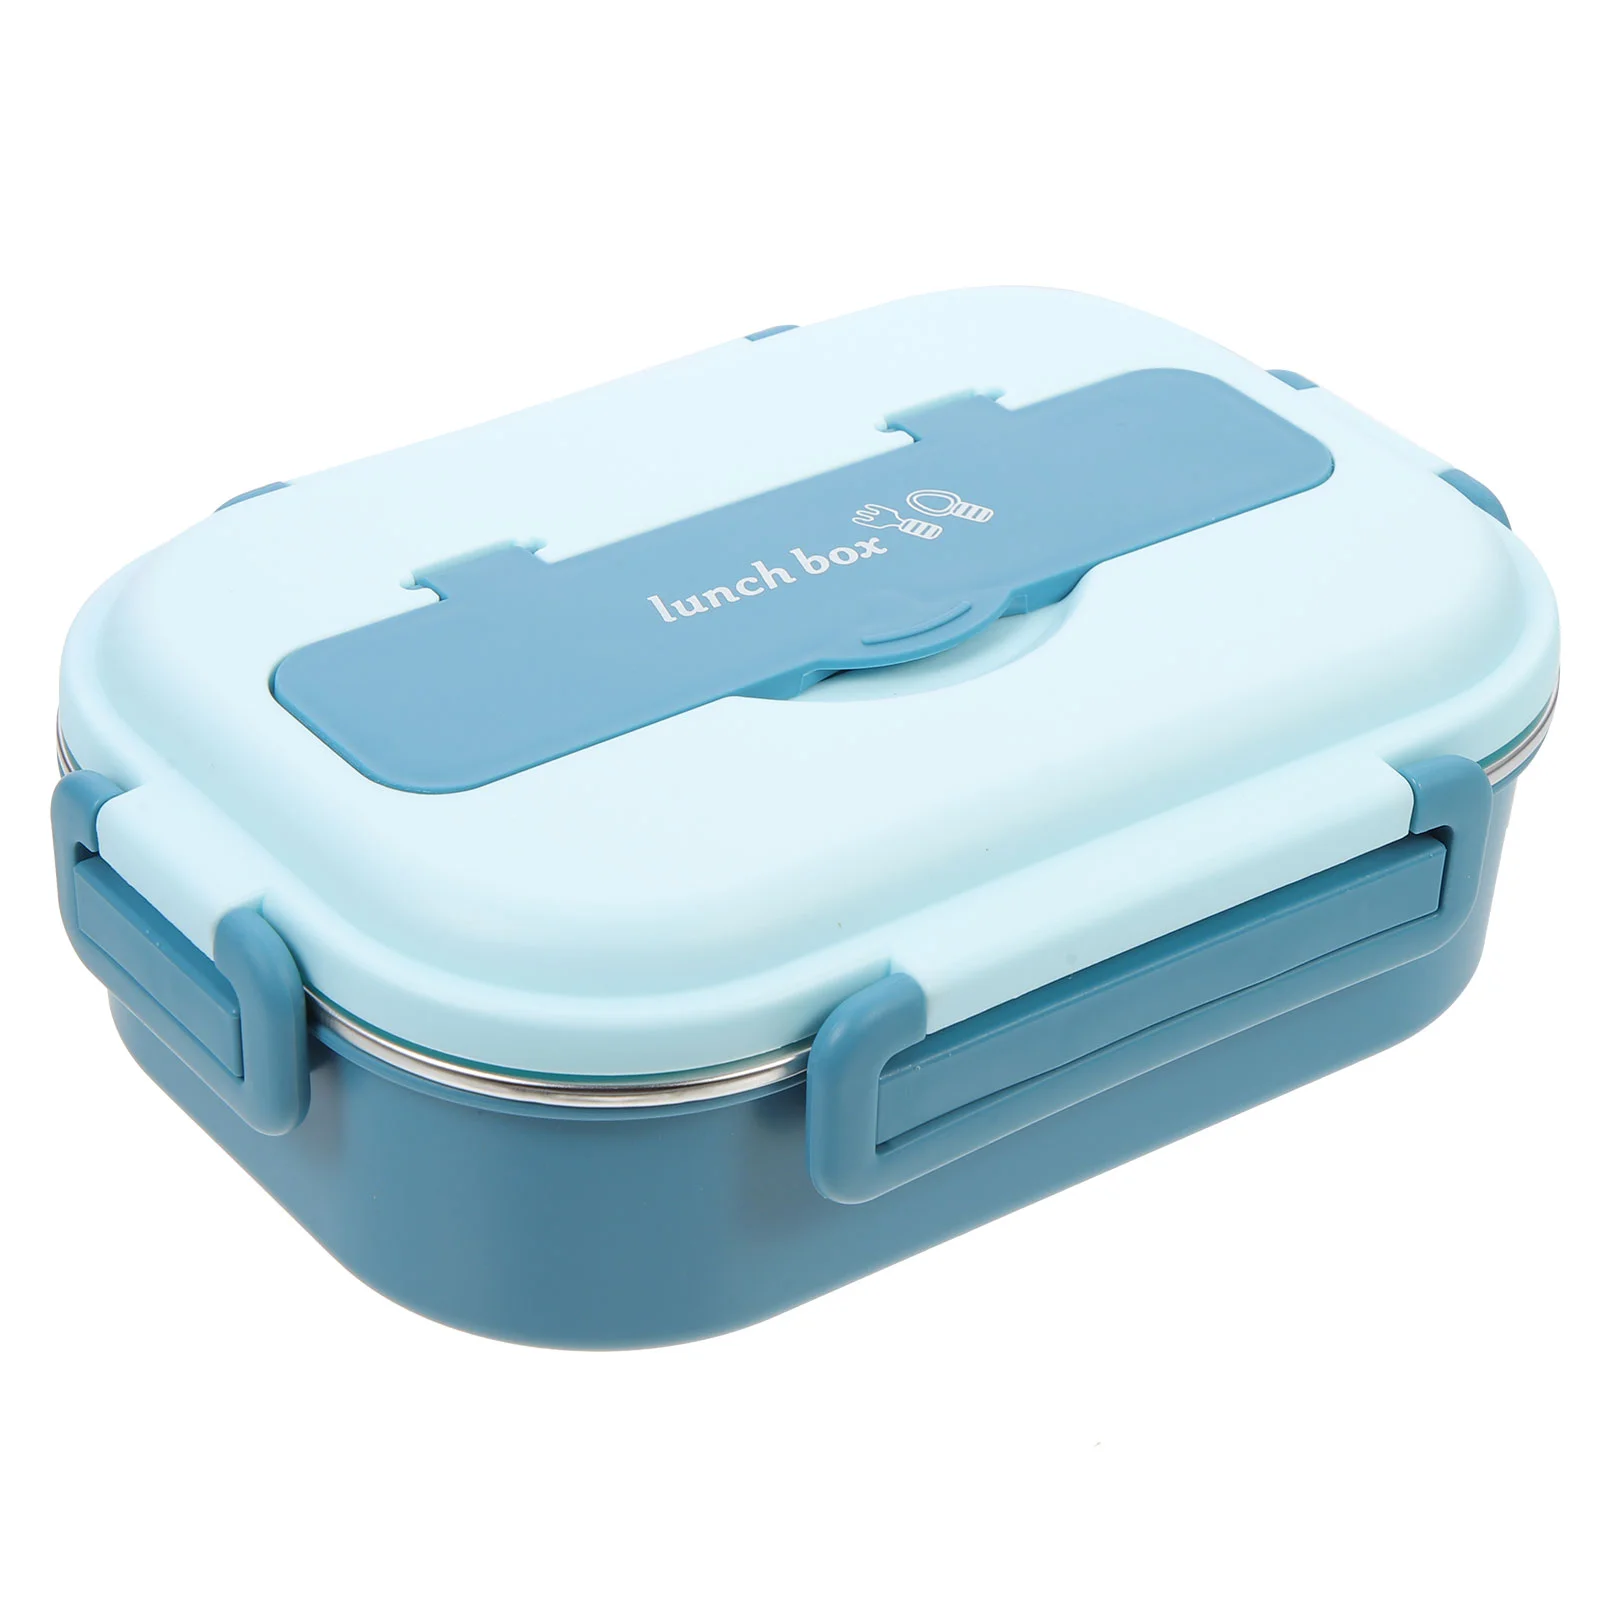 

Portable Snack Containers Divider Lunch Box Holder Bento Case Food Stainless Steel Adult Child